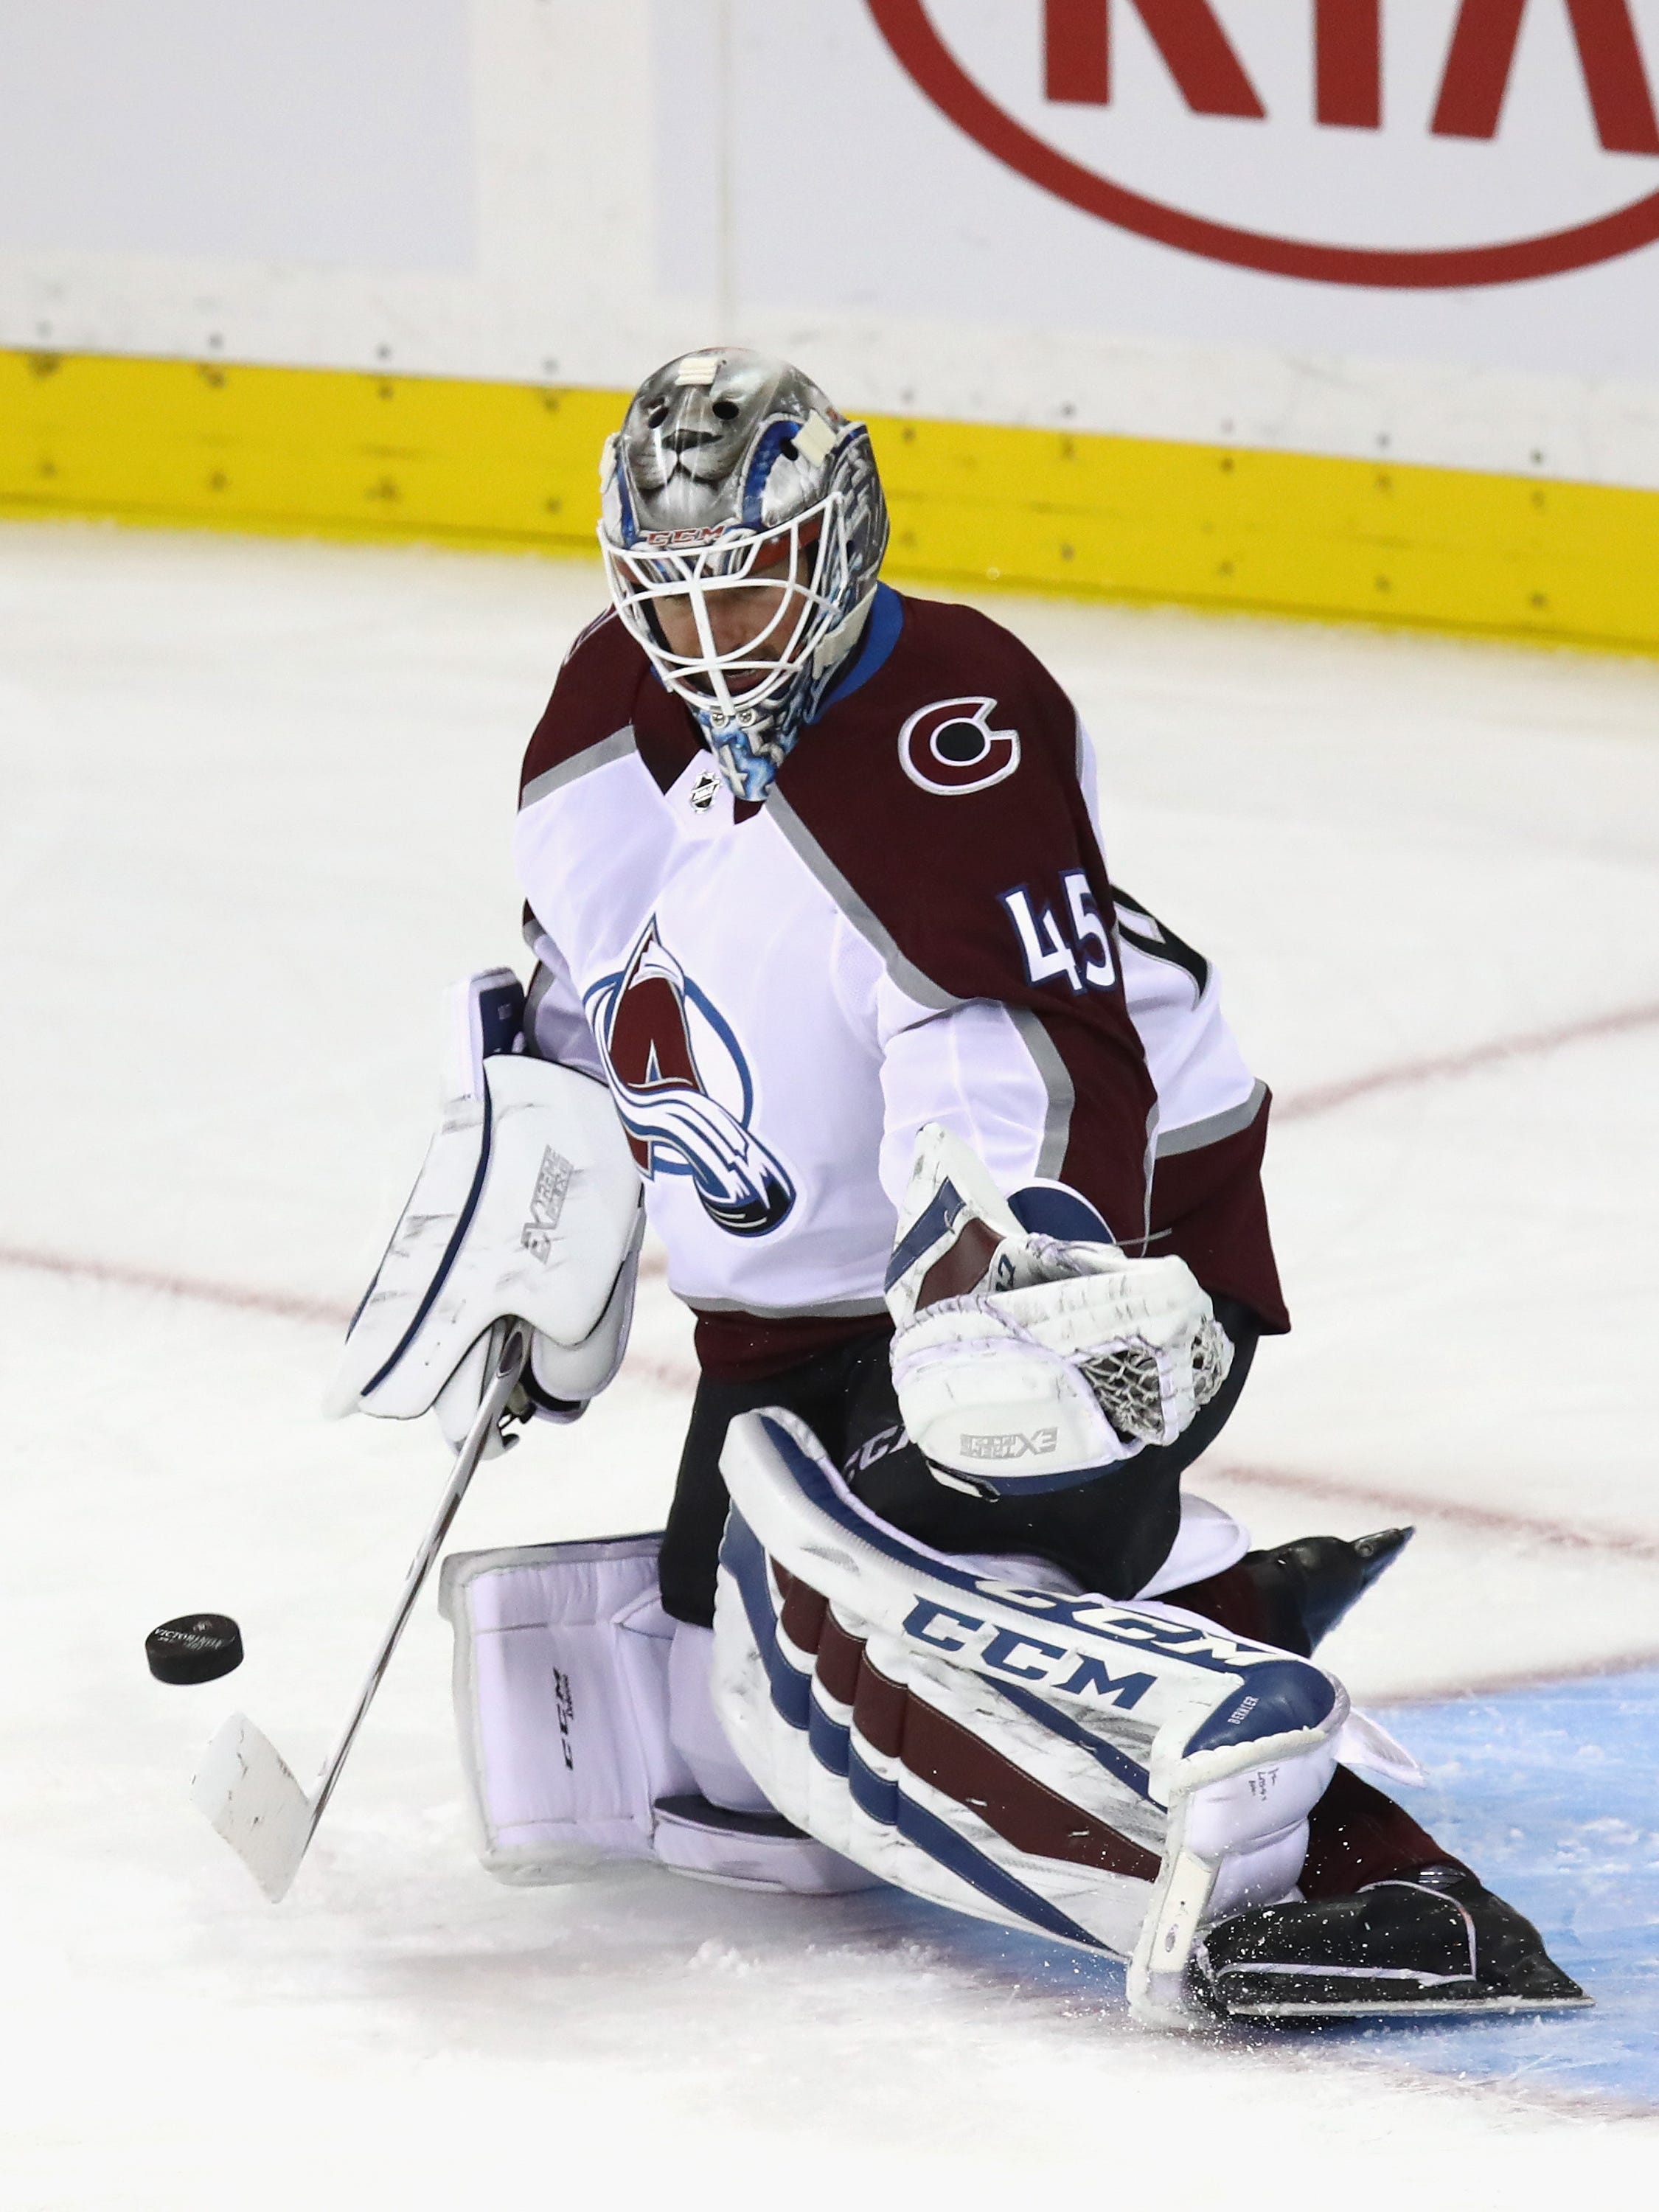 Jonathan Bernier of the Colorado Avalanche tends net in warm-ups prior to the game against the New York Rangers at Madison Square Garden on October 5, 2017 in New York.